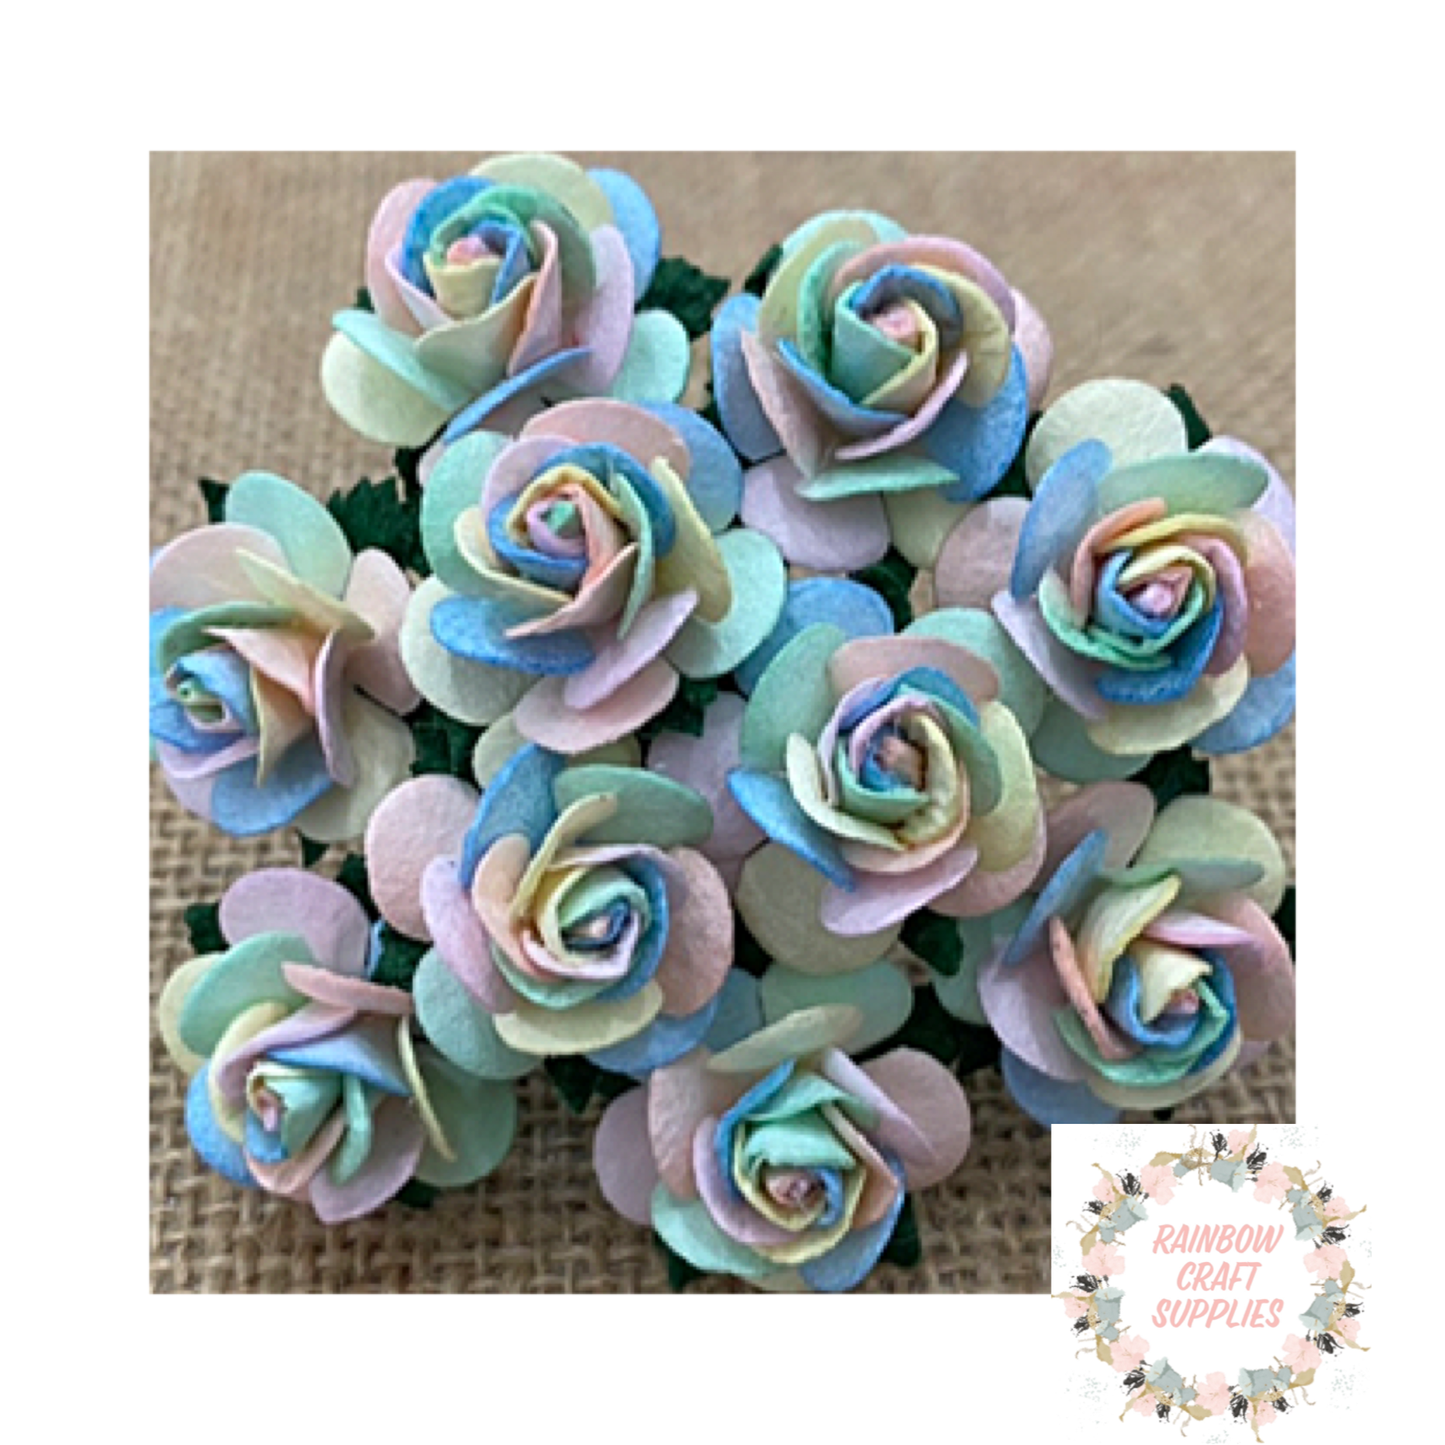 Mulberry open roses 15mm pastel rainbows x 10 heads